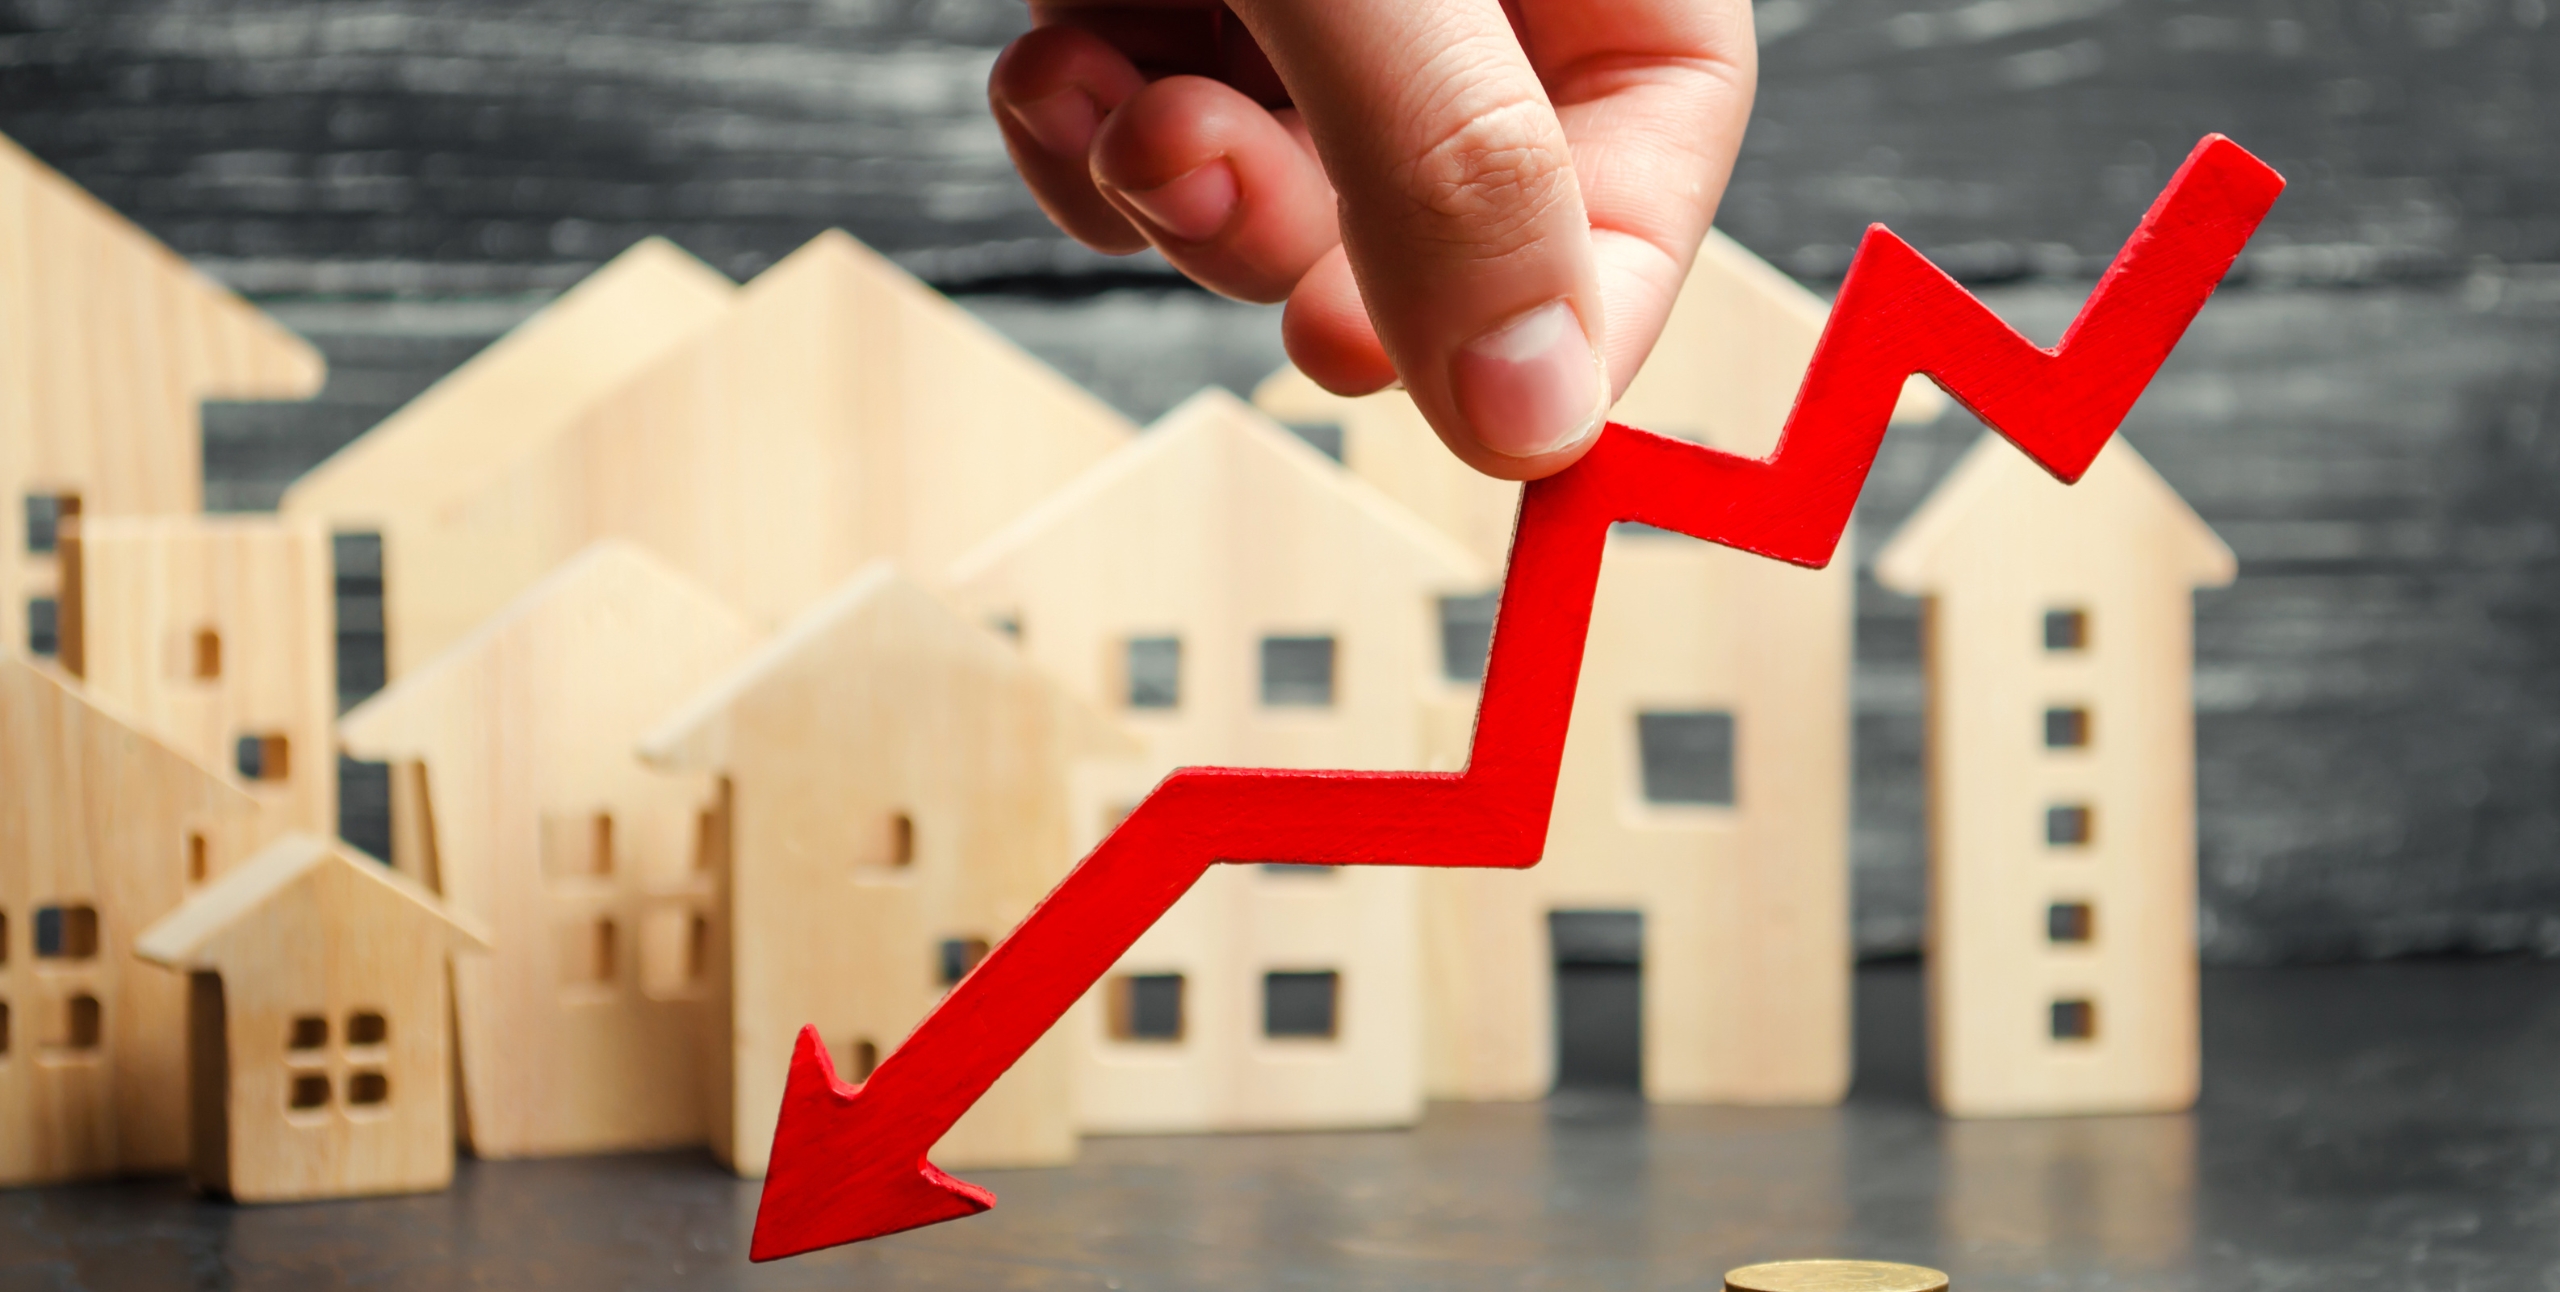 The Housing Market Is About to Bottom and Will Enable a Soft Landing